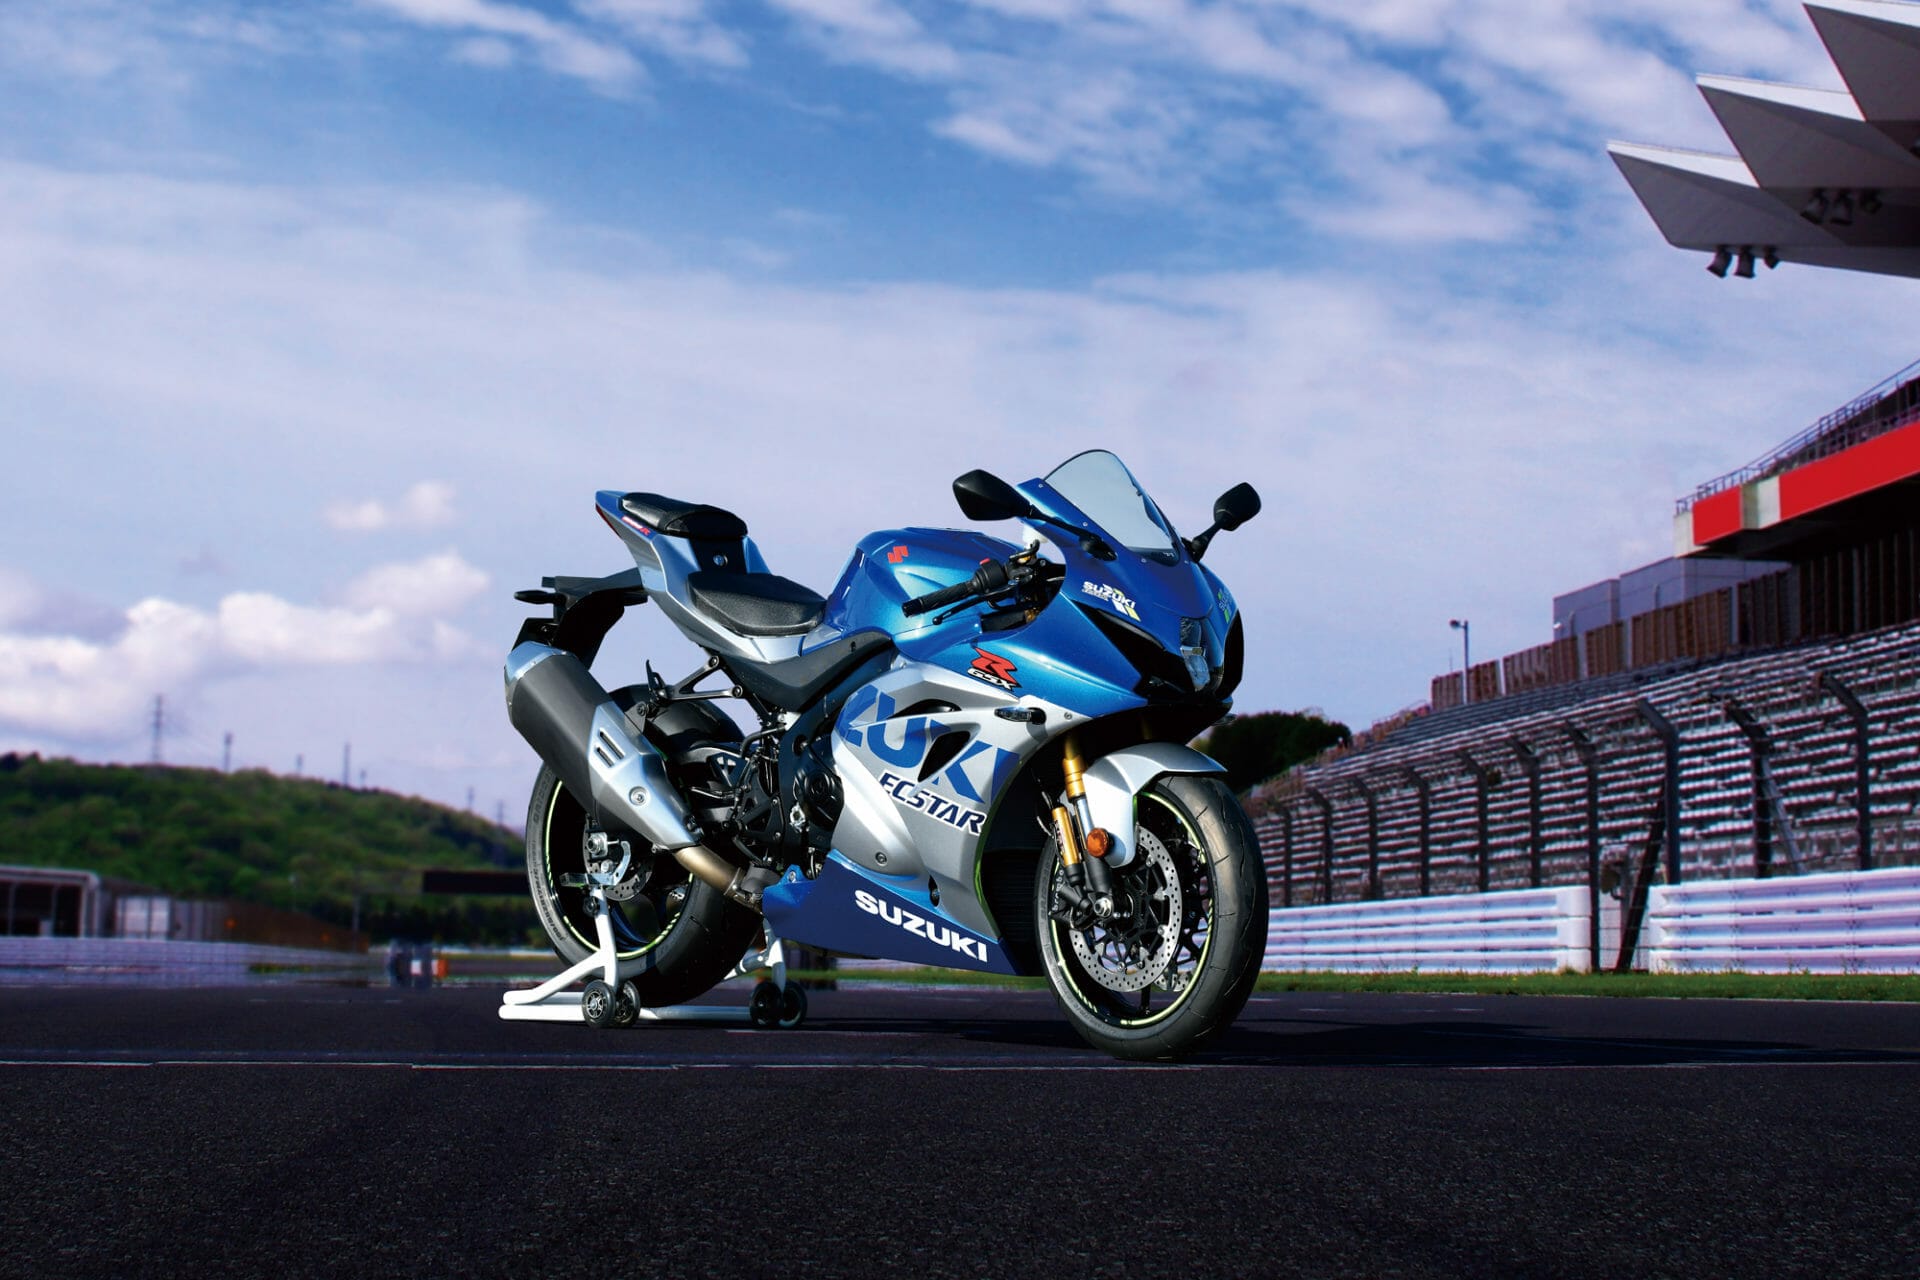 Limited Suzuki GSX-R1000R for the 100th company anniversary
- also in the App MOTORCYCLE NEWS